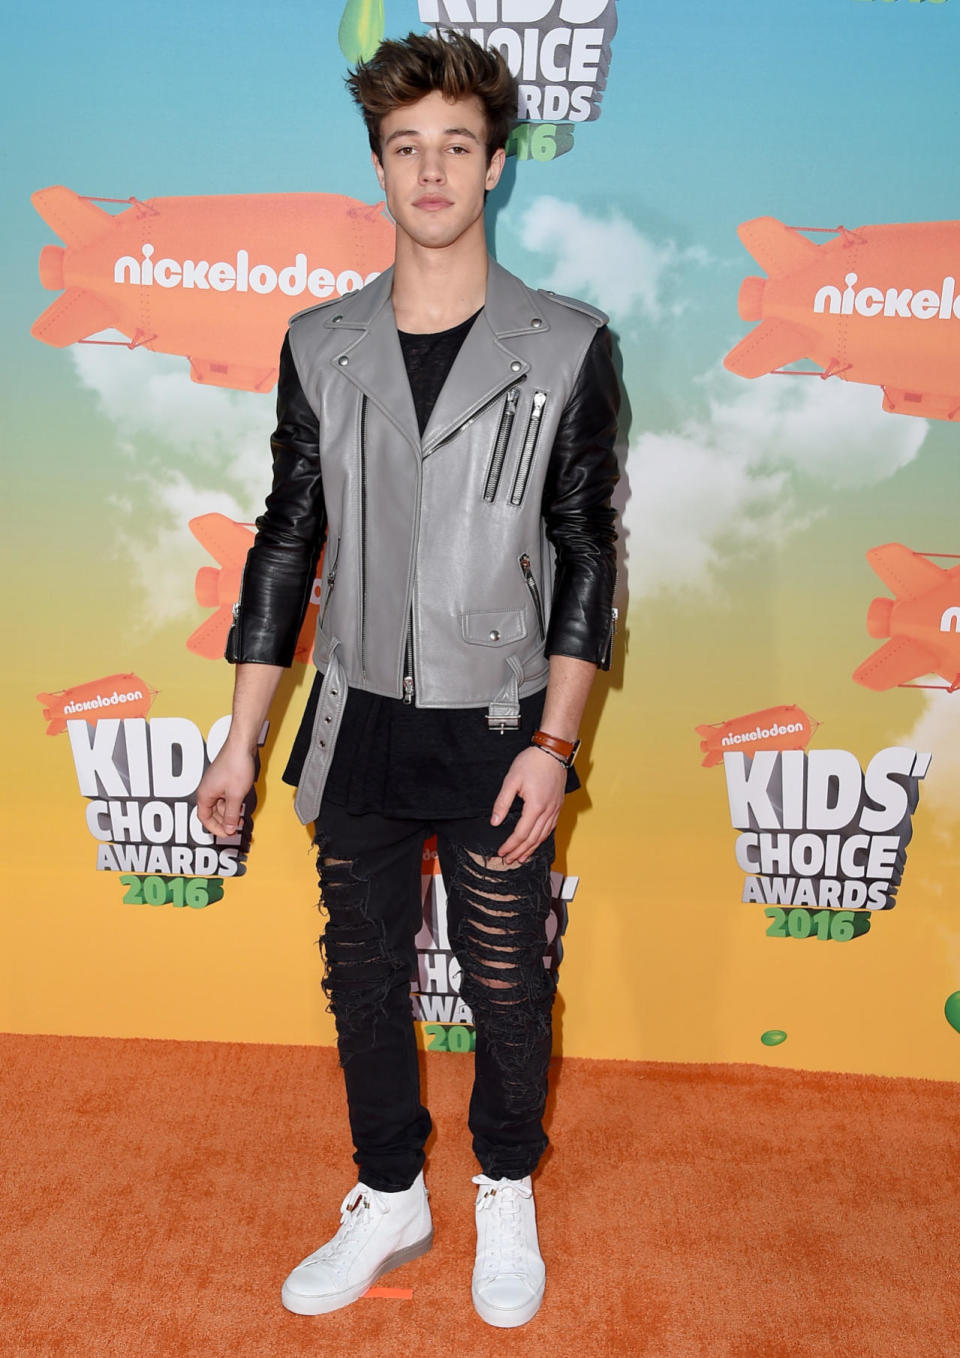 Cameron Dallas looked ever the teen heartthrob at the 2016 Kids’ Choice Awards